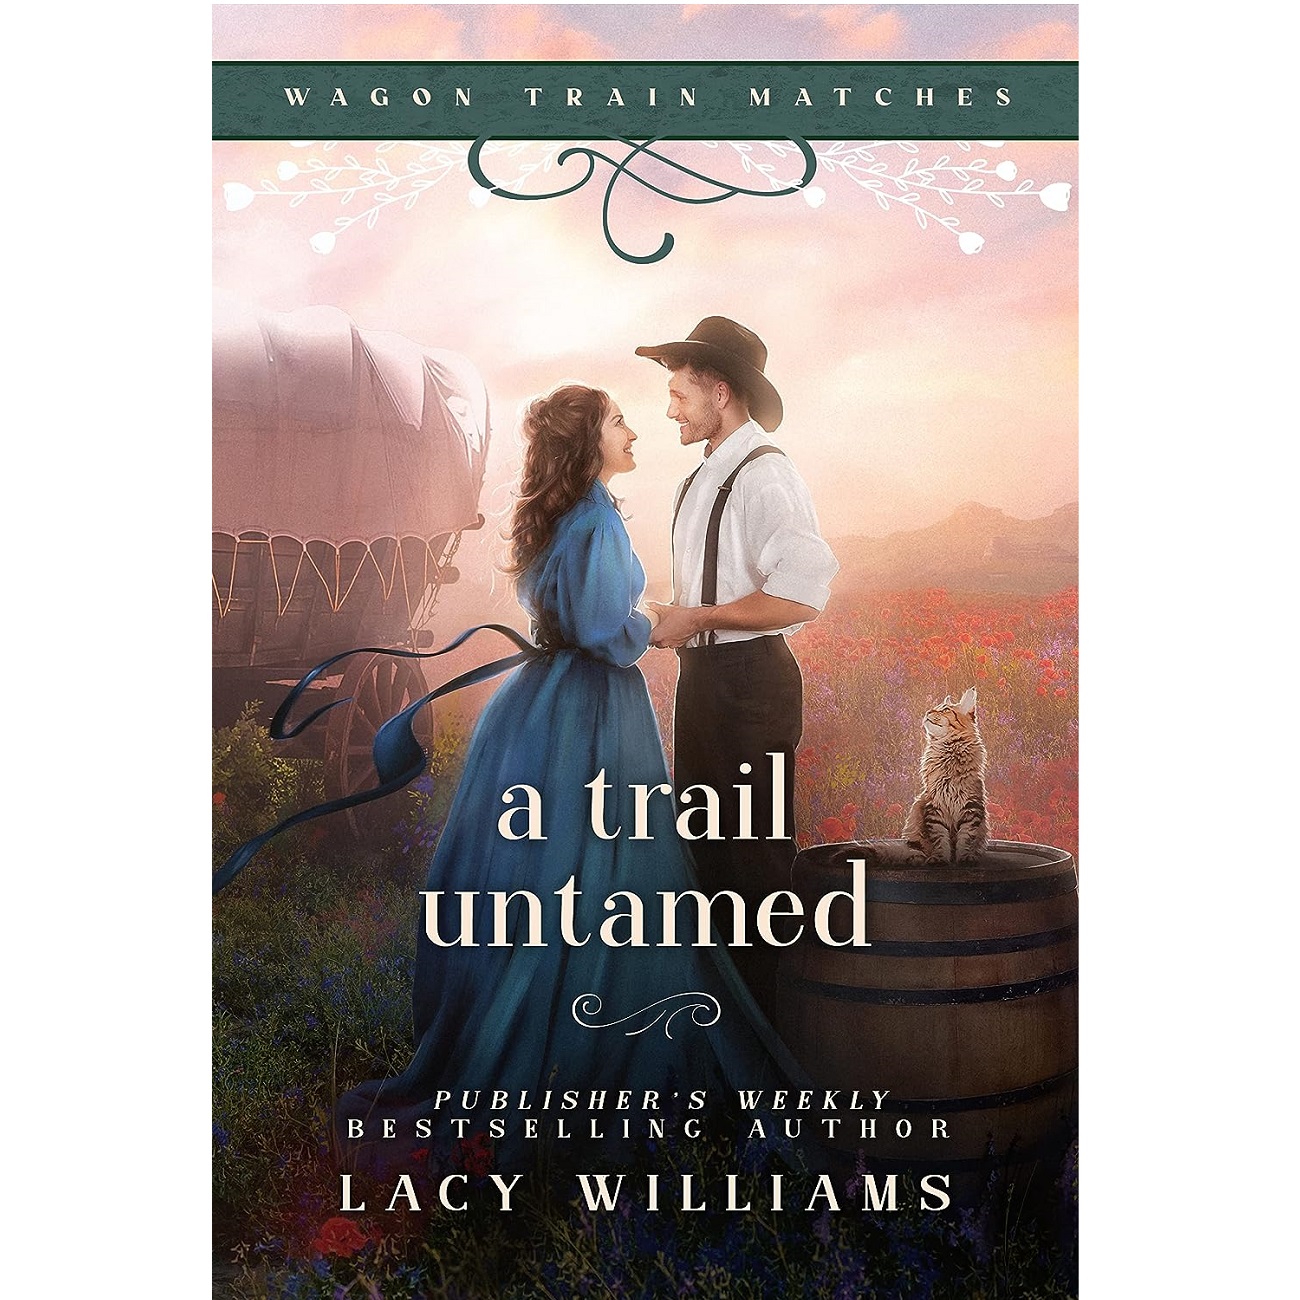 A Trail Untamed by Lacy Williams PDF Download